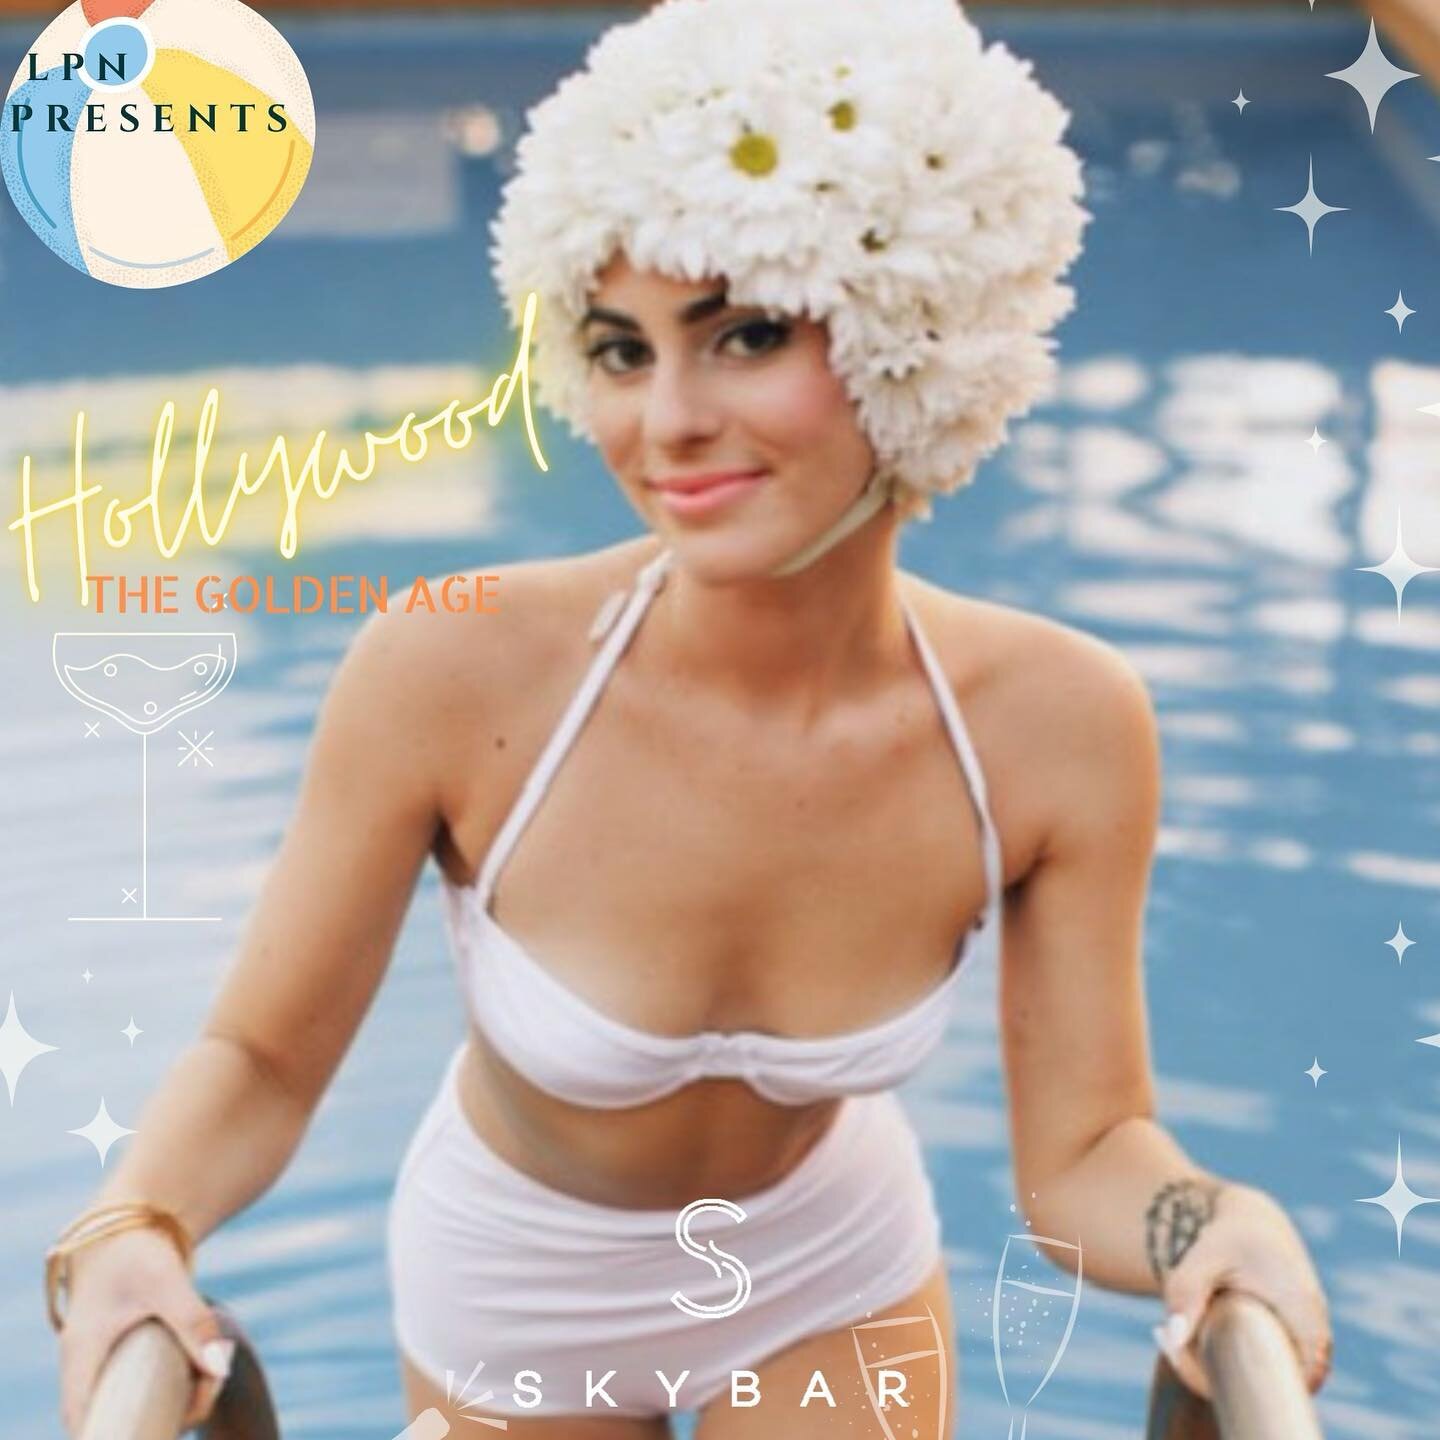 LPN Presents &quot;Hollywood- The Golden Age&quot; at the Skybar Pool Deck of the Mondrian Hotel. Thursday, July 28, 2022, 6:30pm-1:30am. Travel back in time as we recreate 1950s Hollywood. Network with hundreds of professionals &amp; influencers at 